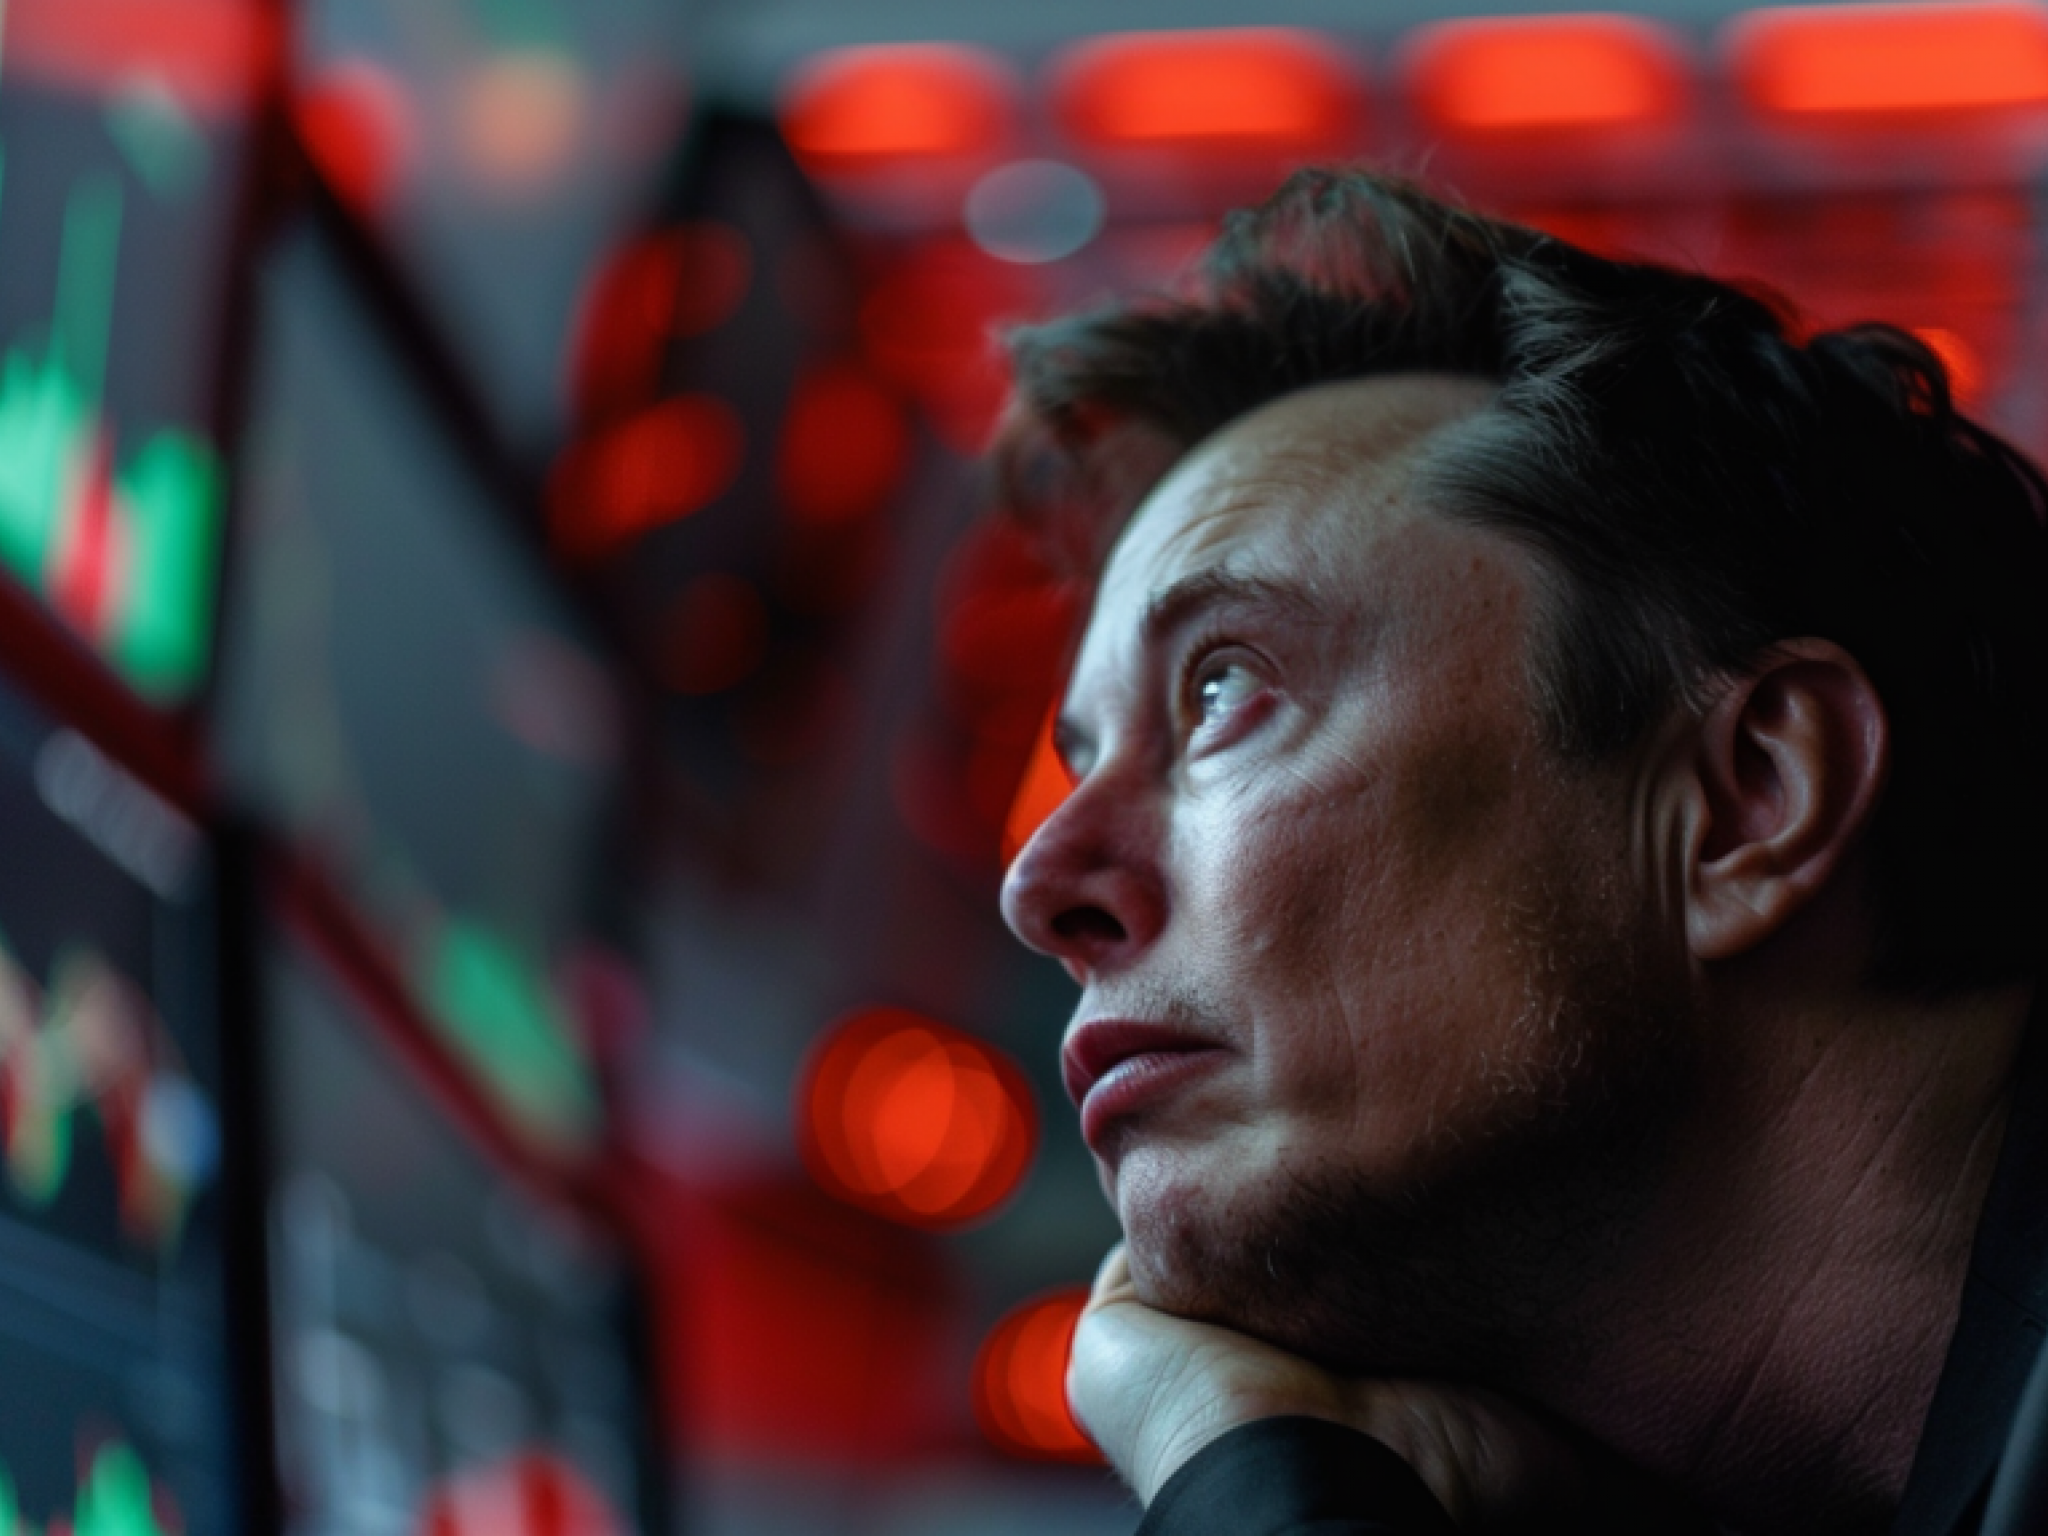  elon-musk-slips-from-richest-person-ranking-after-losing-billions-in-recent-months-whos-now-richer 